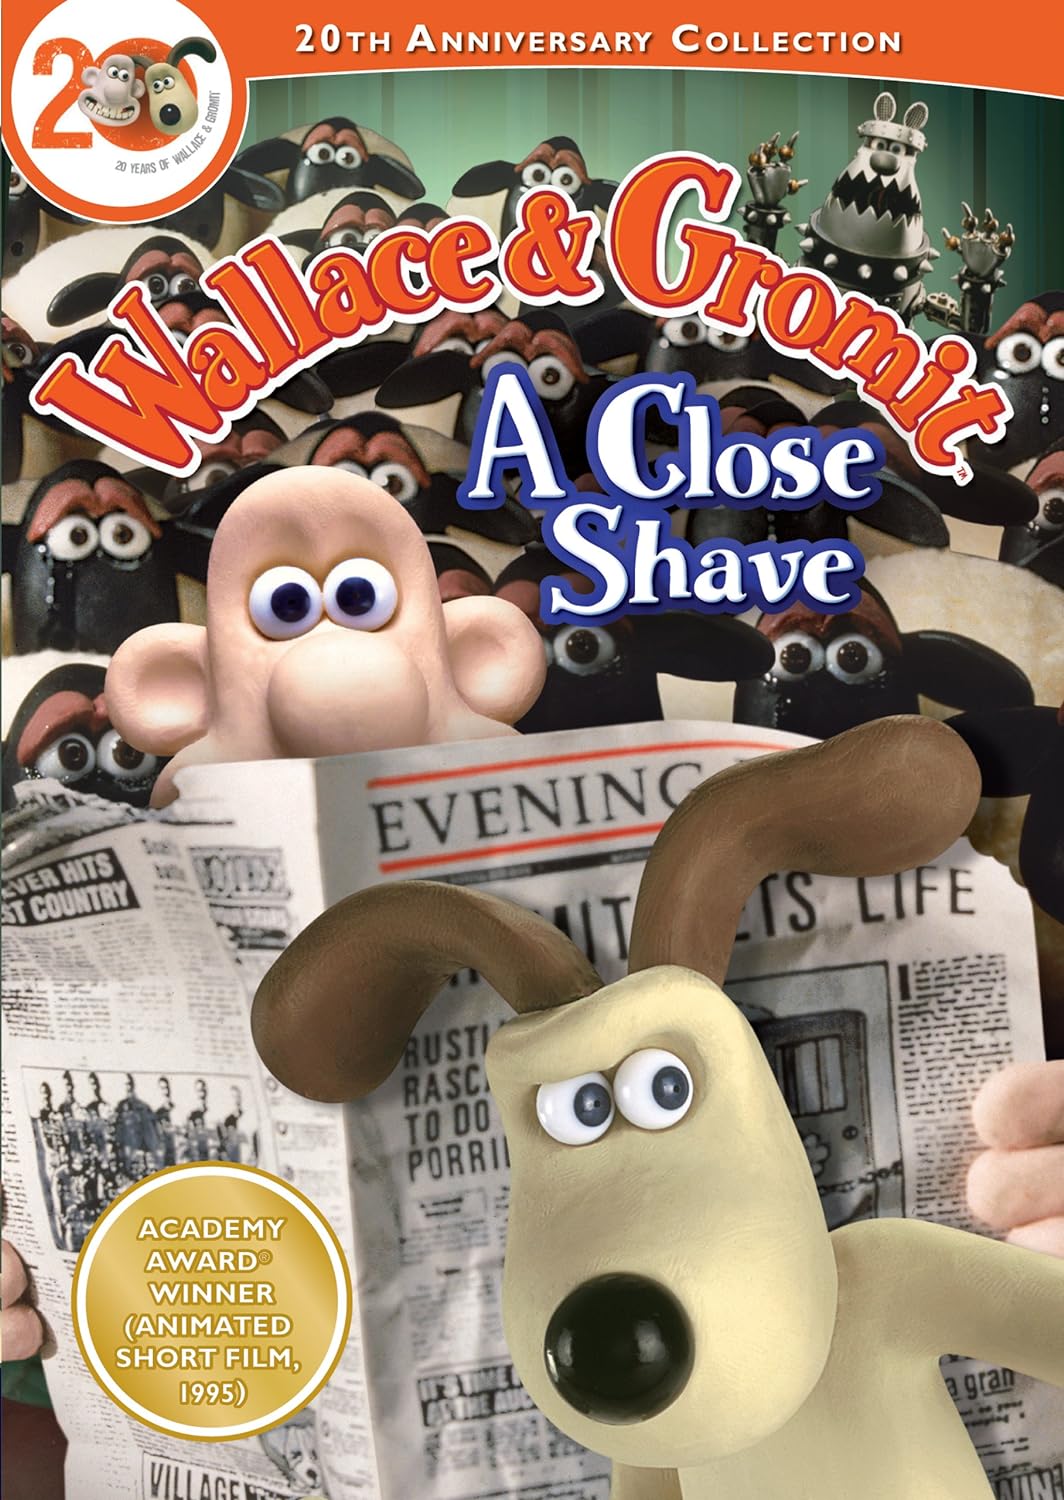 Image for "Wallace & Gromit"